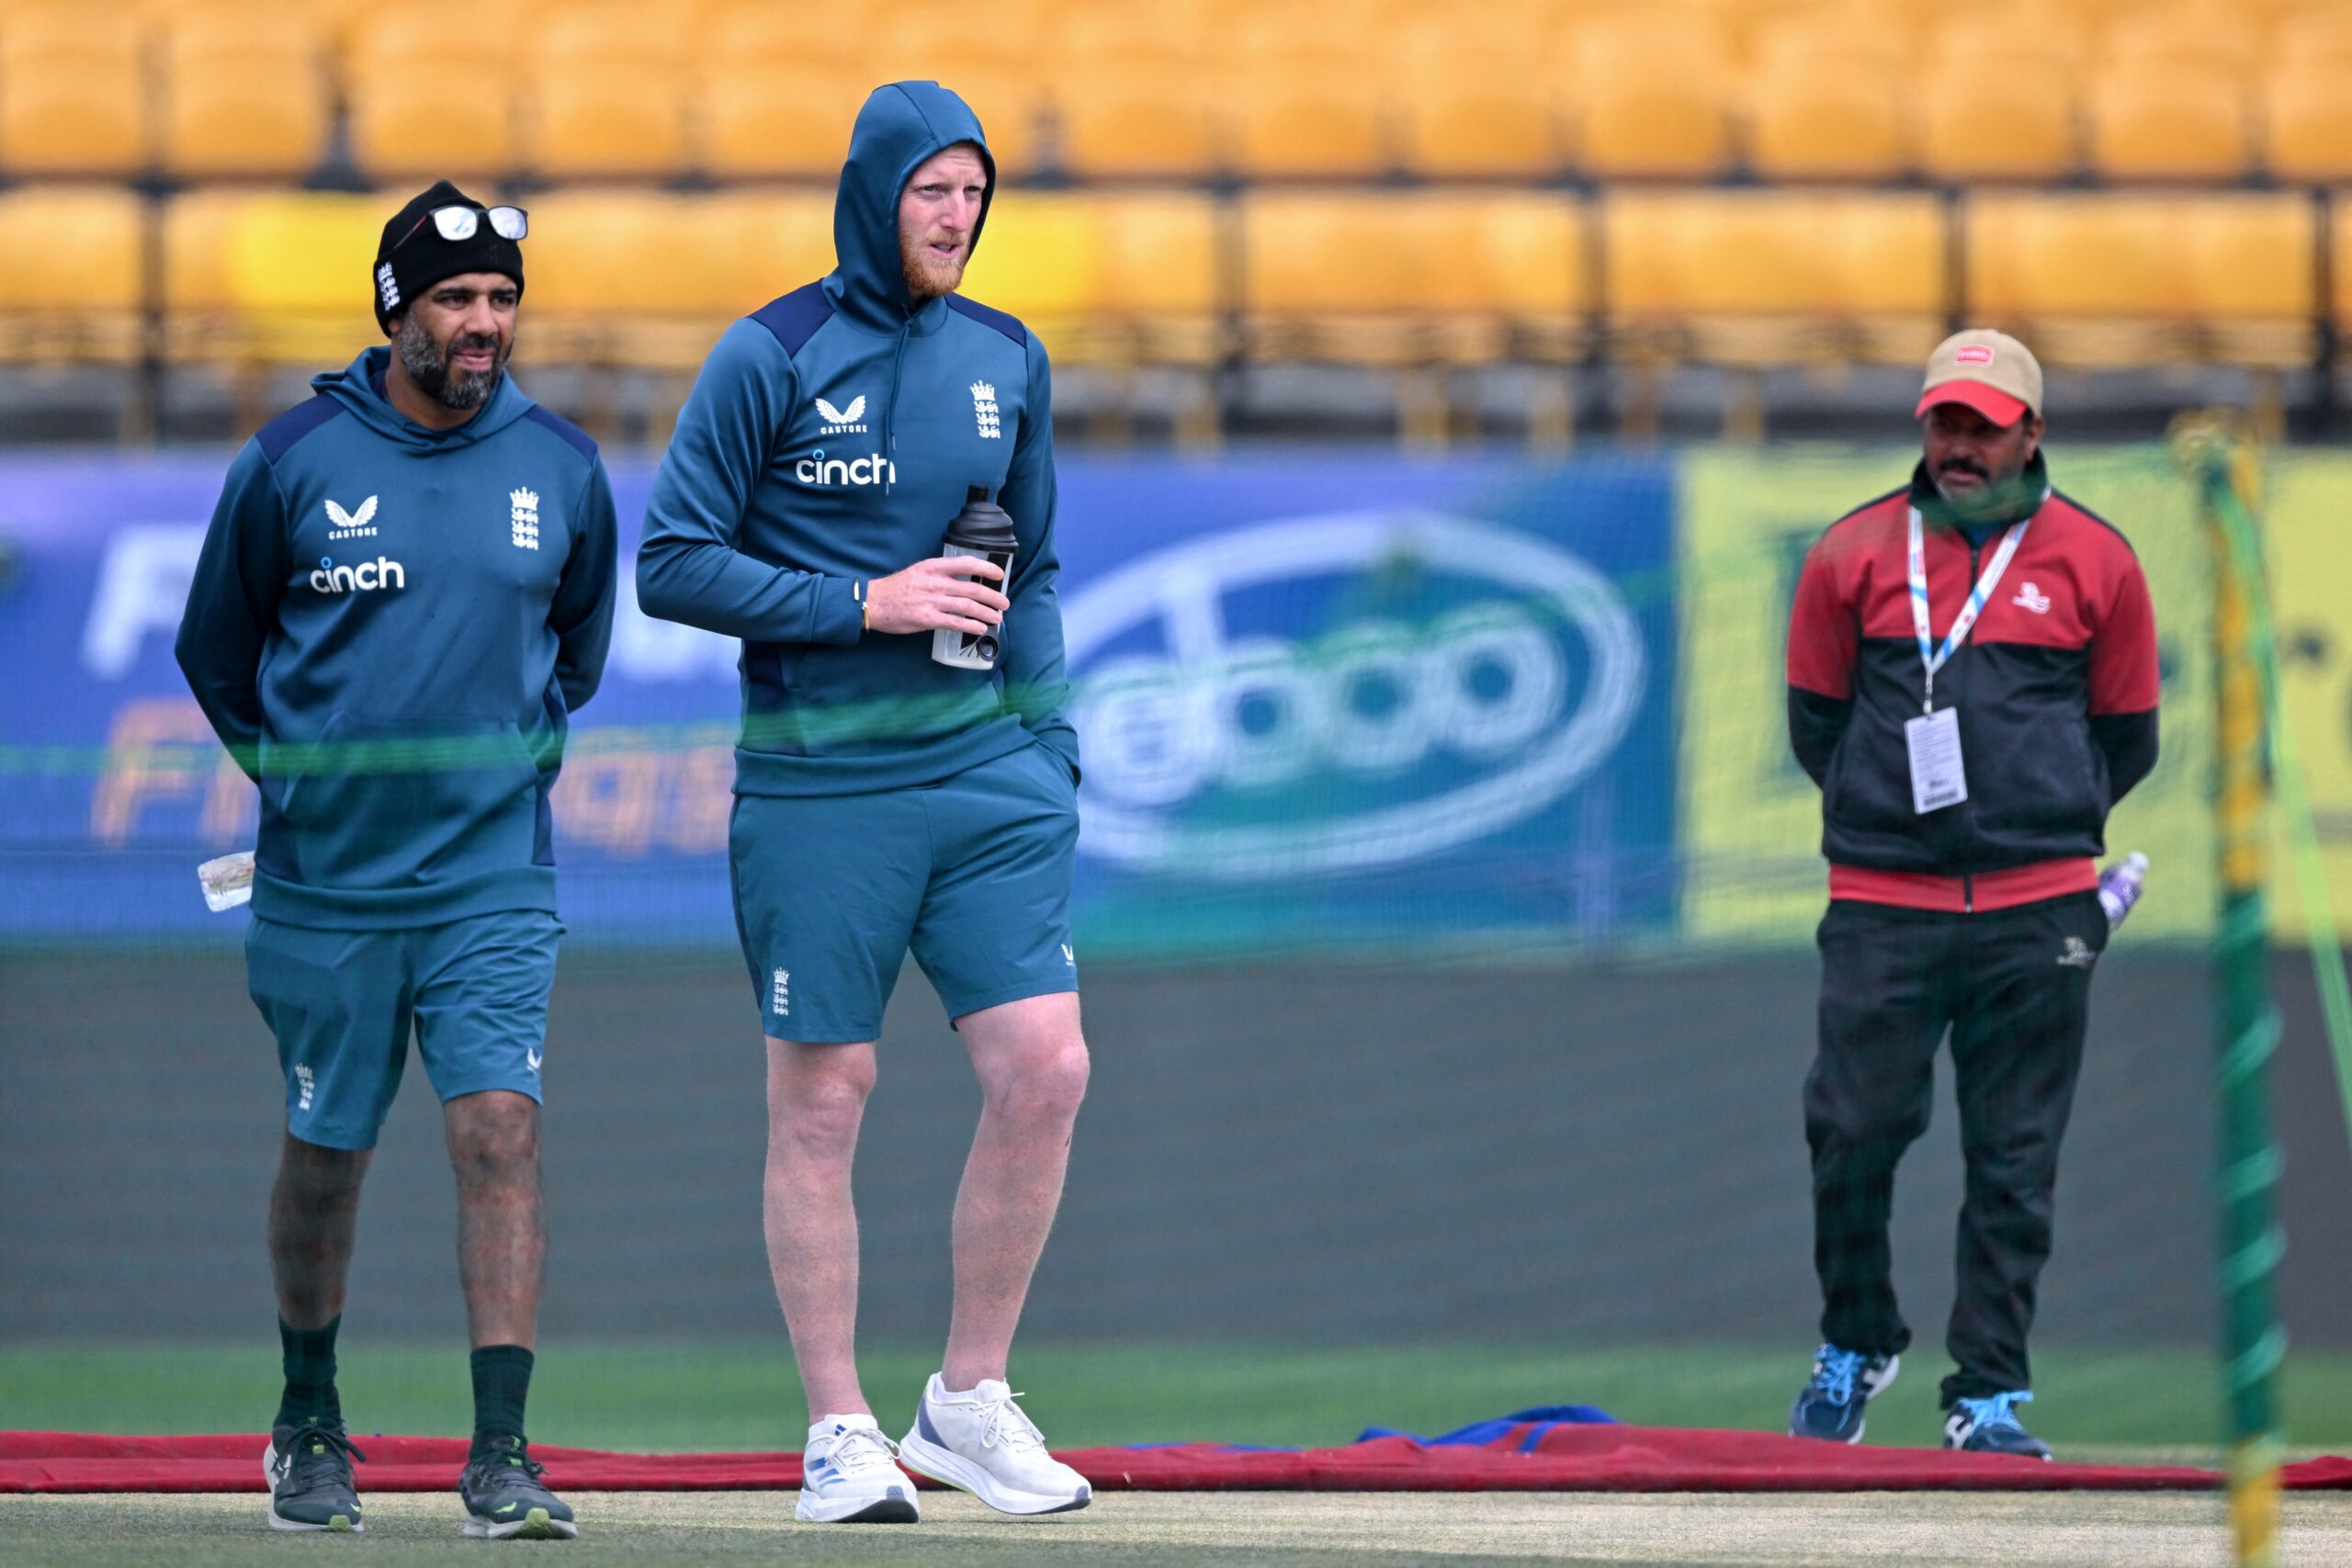 “Looks Like An Absolute Belter”: Ben Stokes On Dharamsala Pitch Ahead Of 5th Test